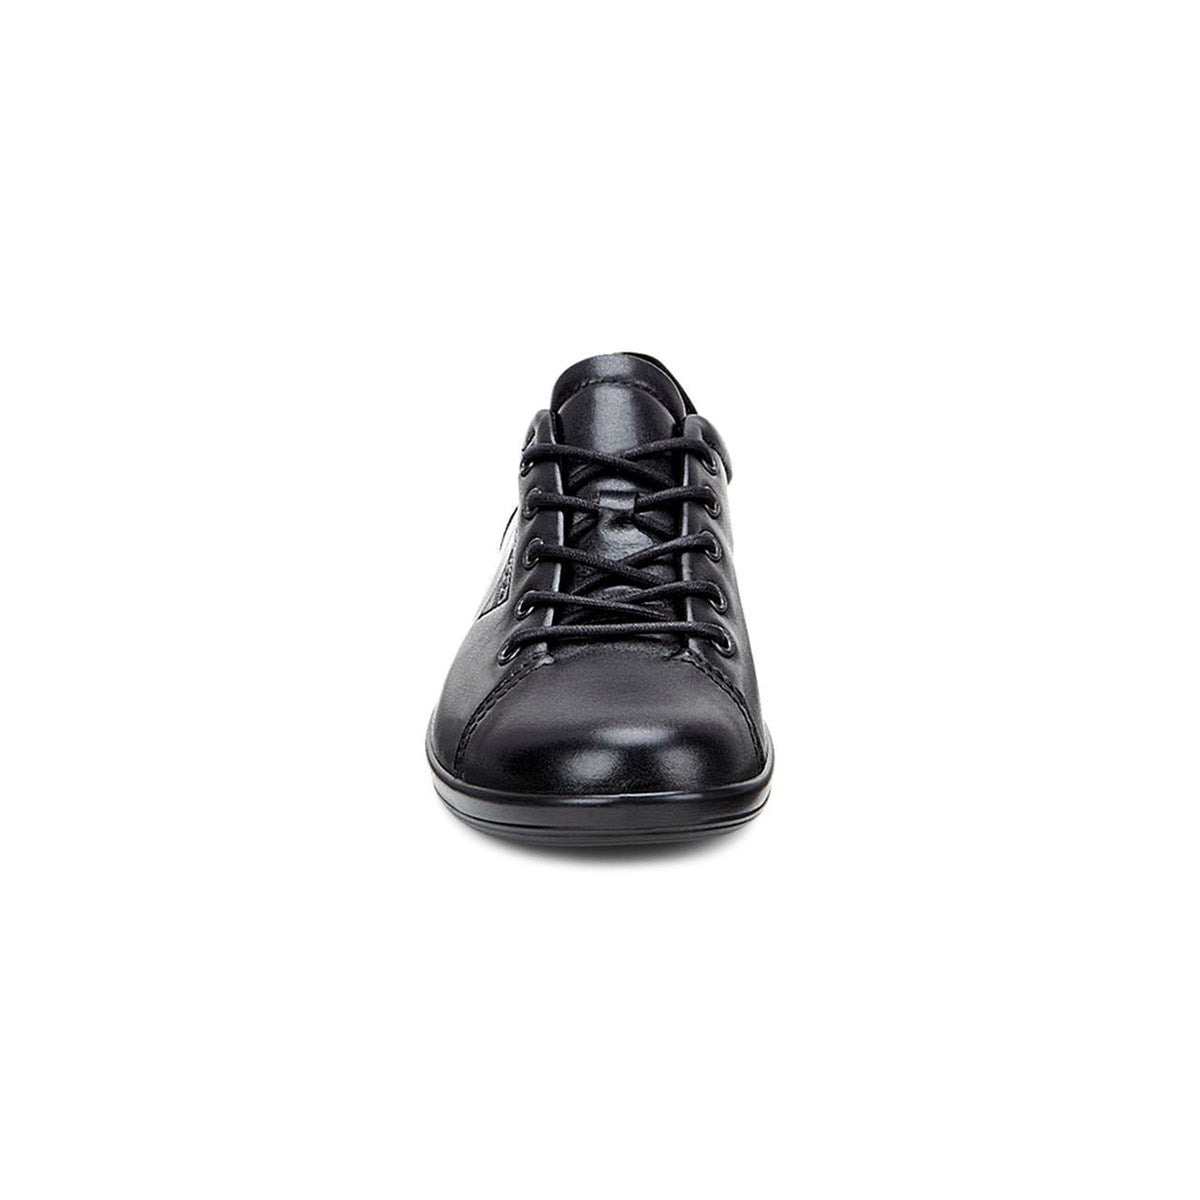 ECCO SOFT 2.0 BLACK - Women sneakers - Collective Shoes 